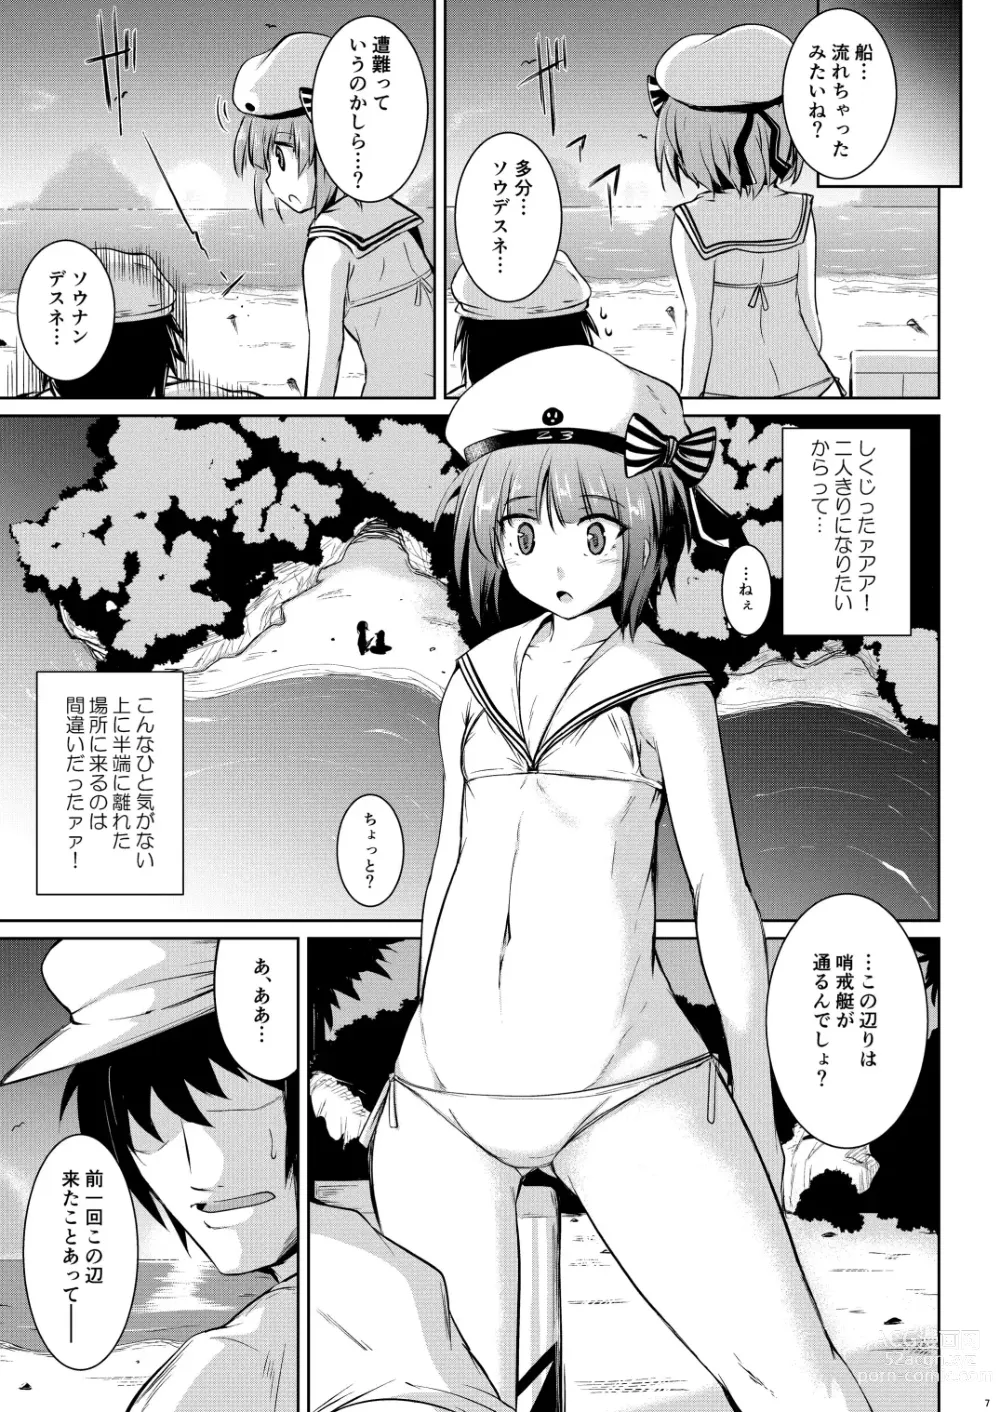 Page 7 of doujinshi Trauminsel